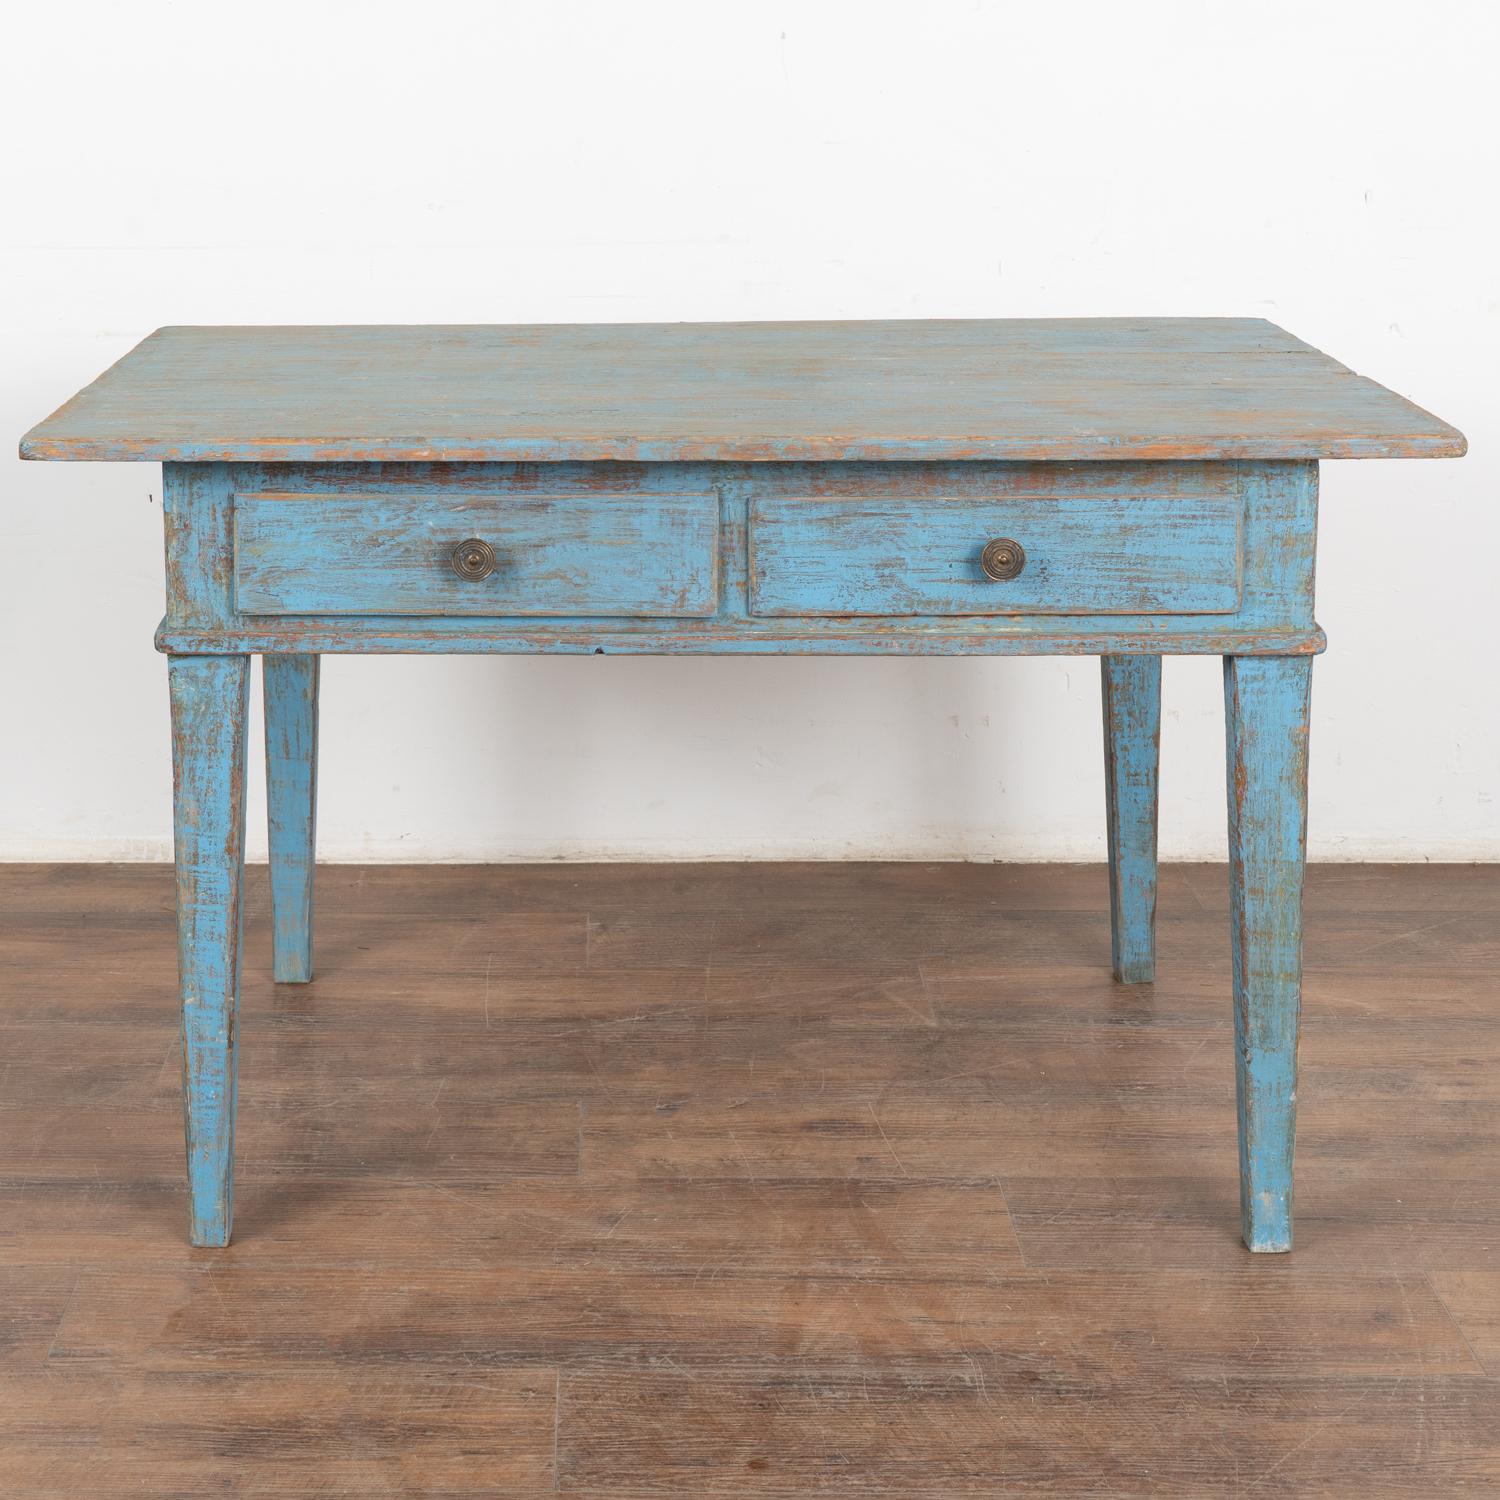 Swedish Blue Painted Pine Farm Table Writing Table With 2 Drawers, Sweden circa 1860-80 For Sale